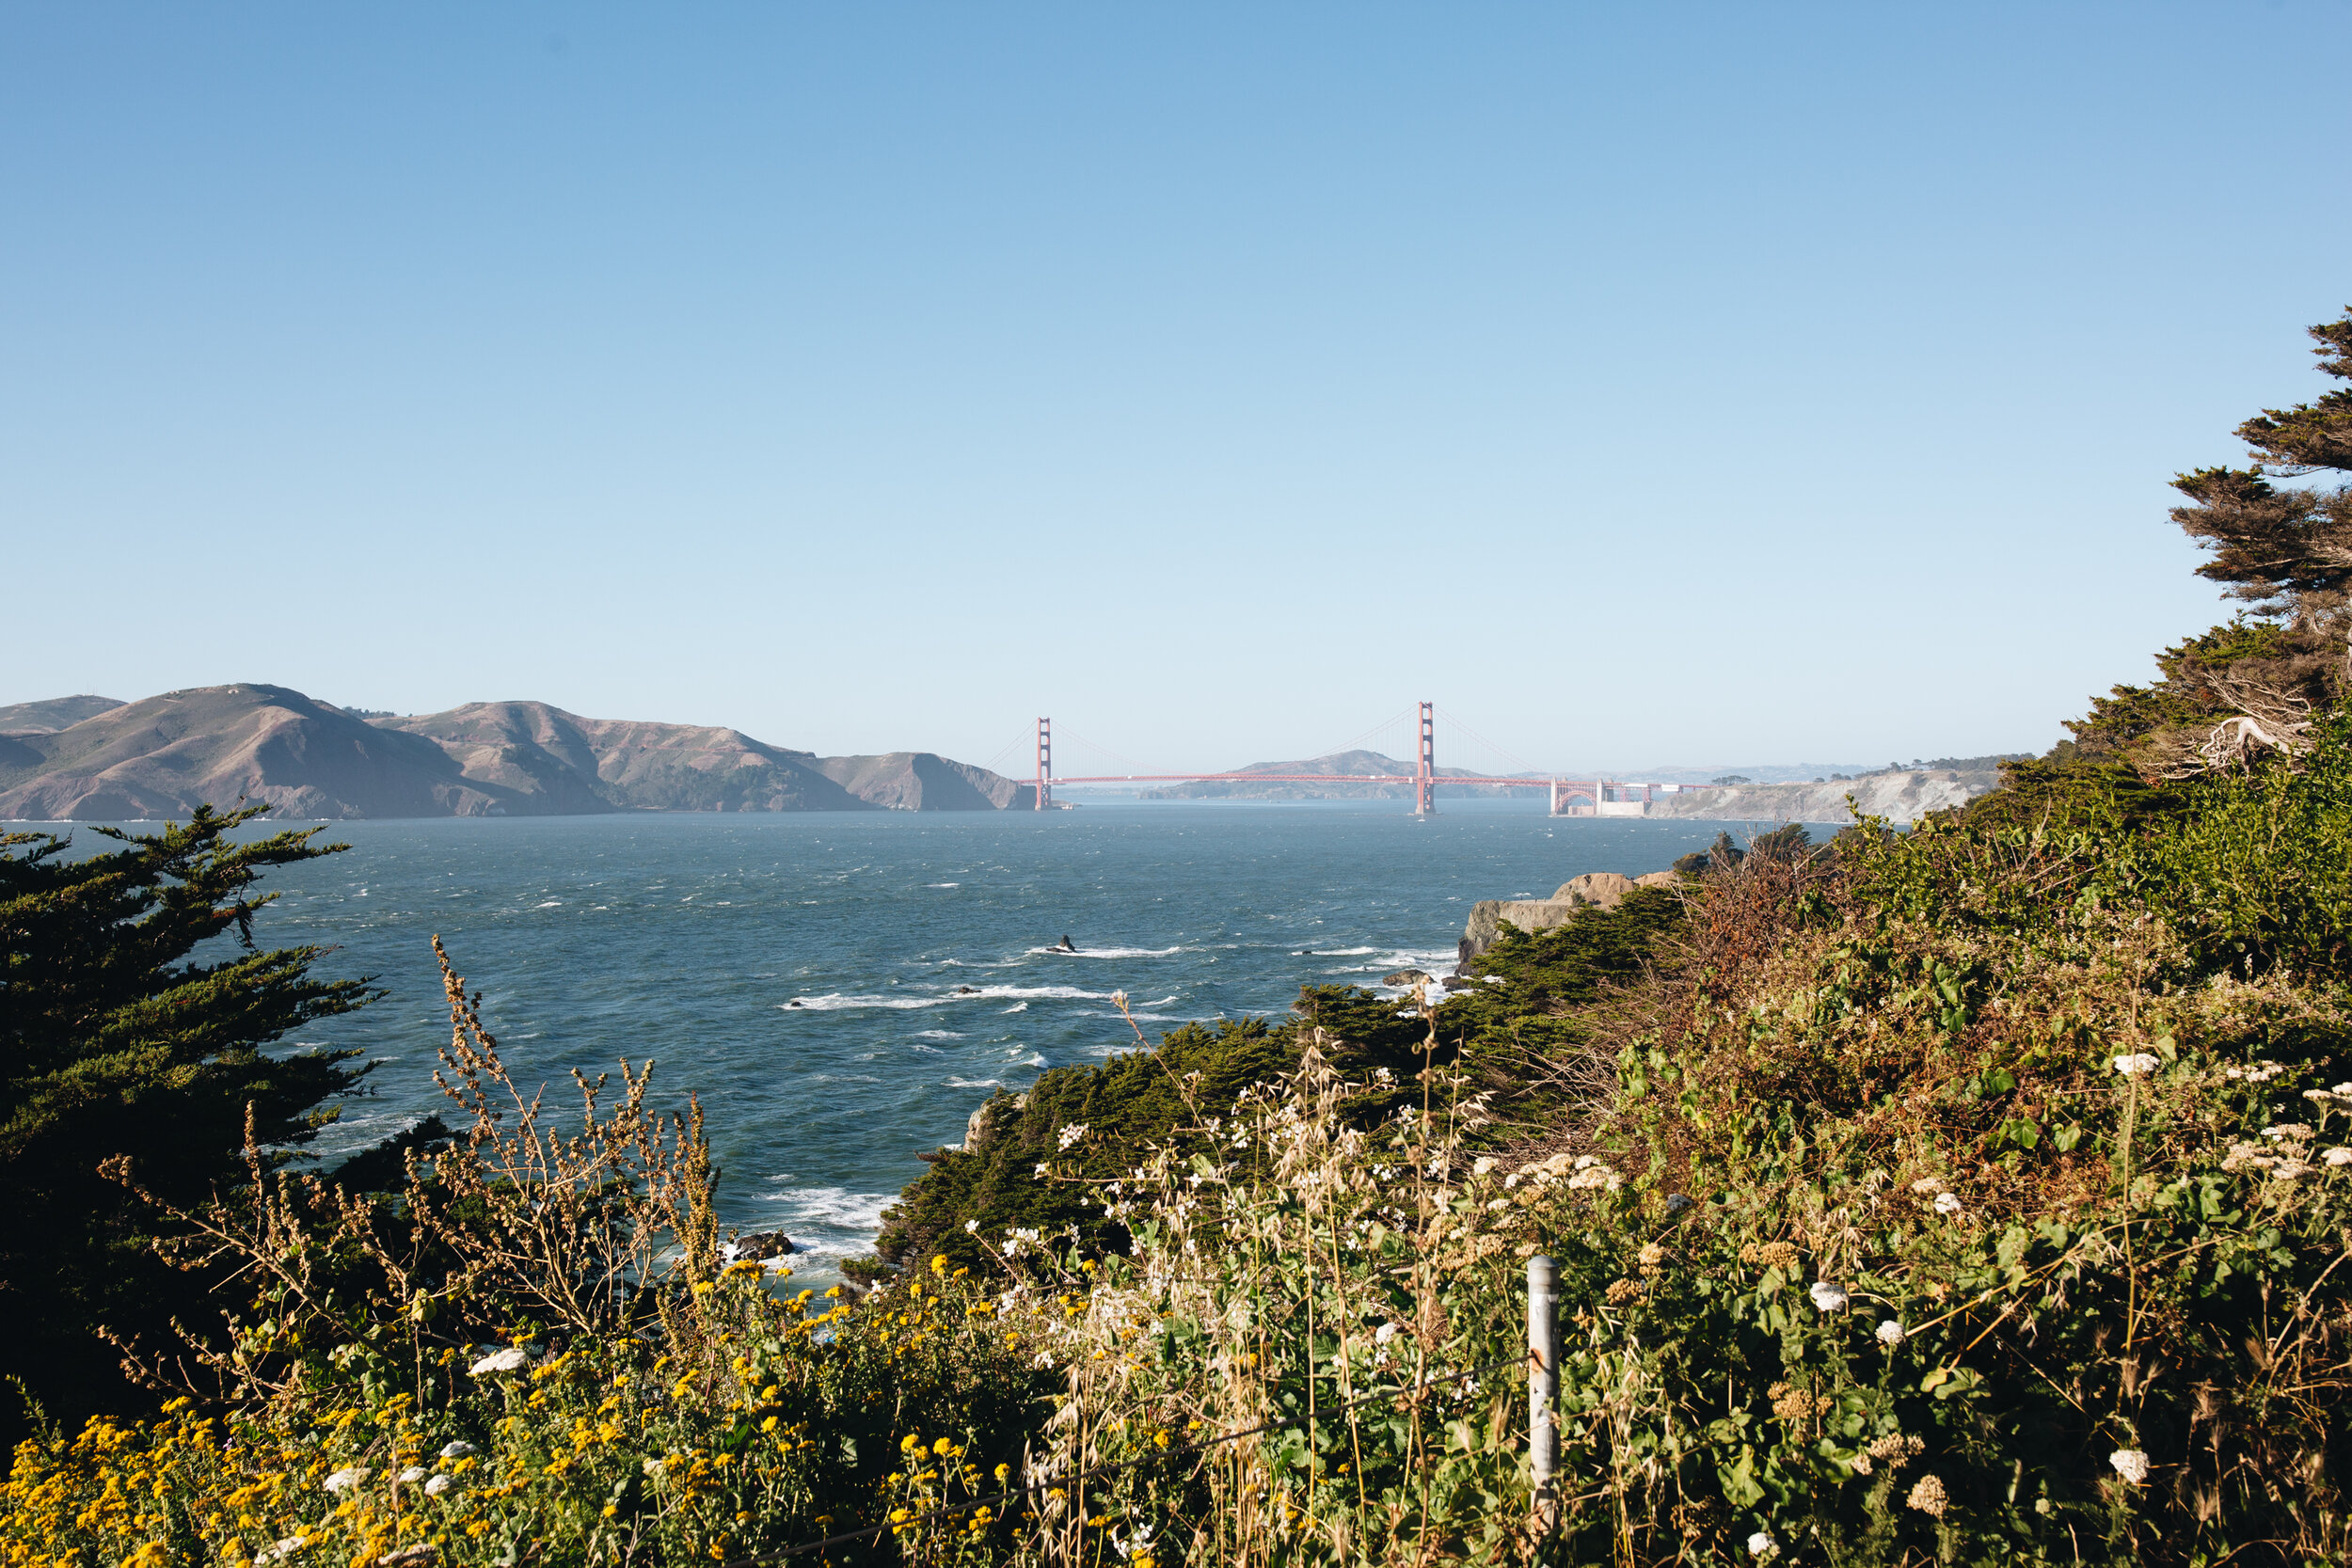 Hike Land's End for Amazing Views of the Golden Gate Bridge